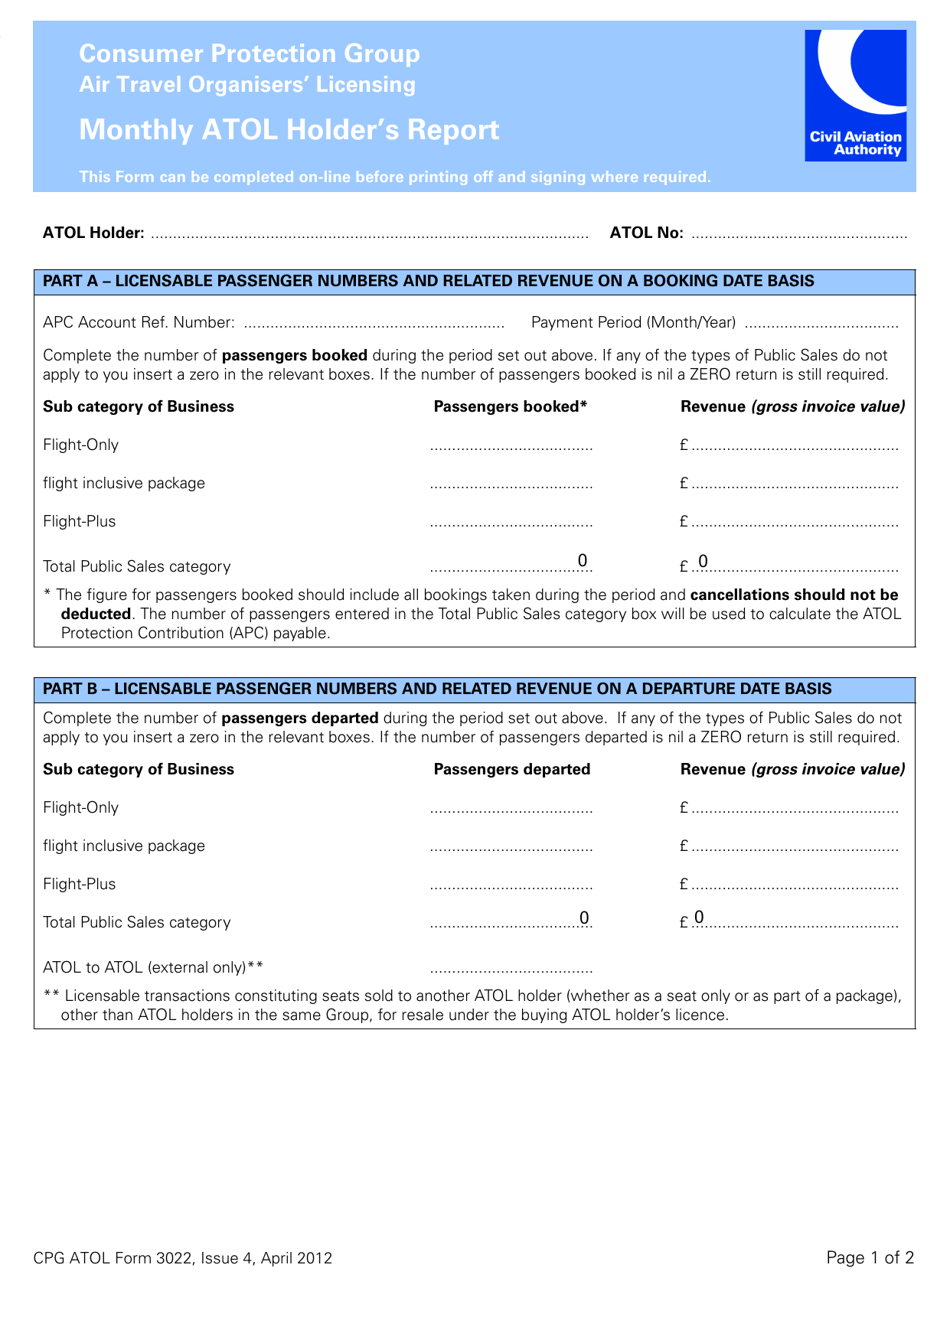 CPG ATOL Form 3022 Monthly Atol Holders Report - United Kingdom, Page 1